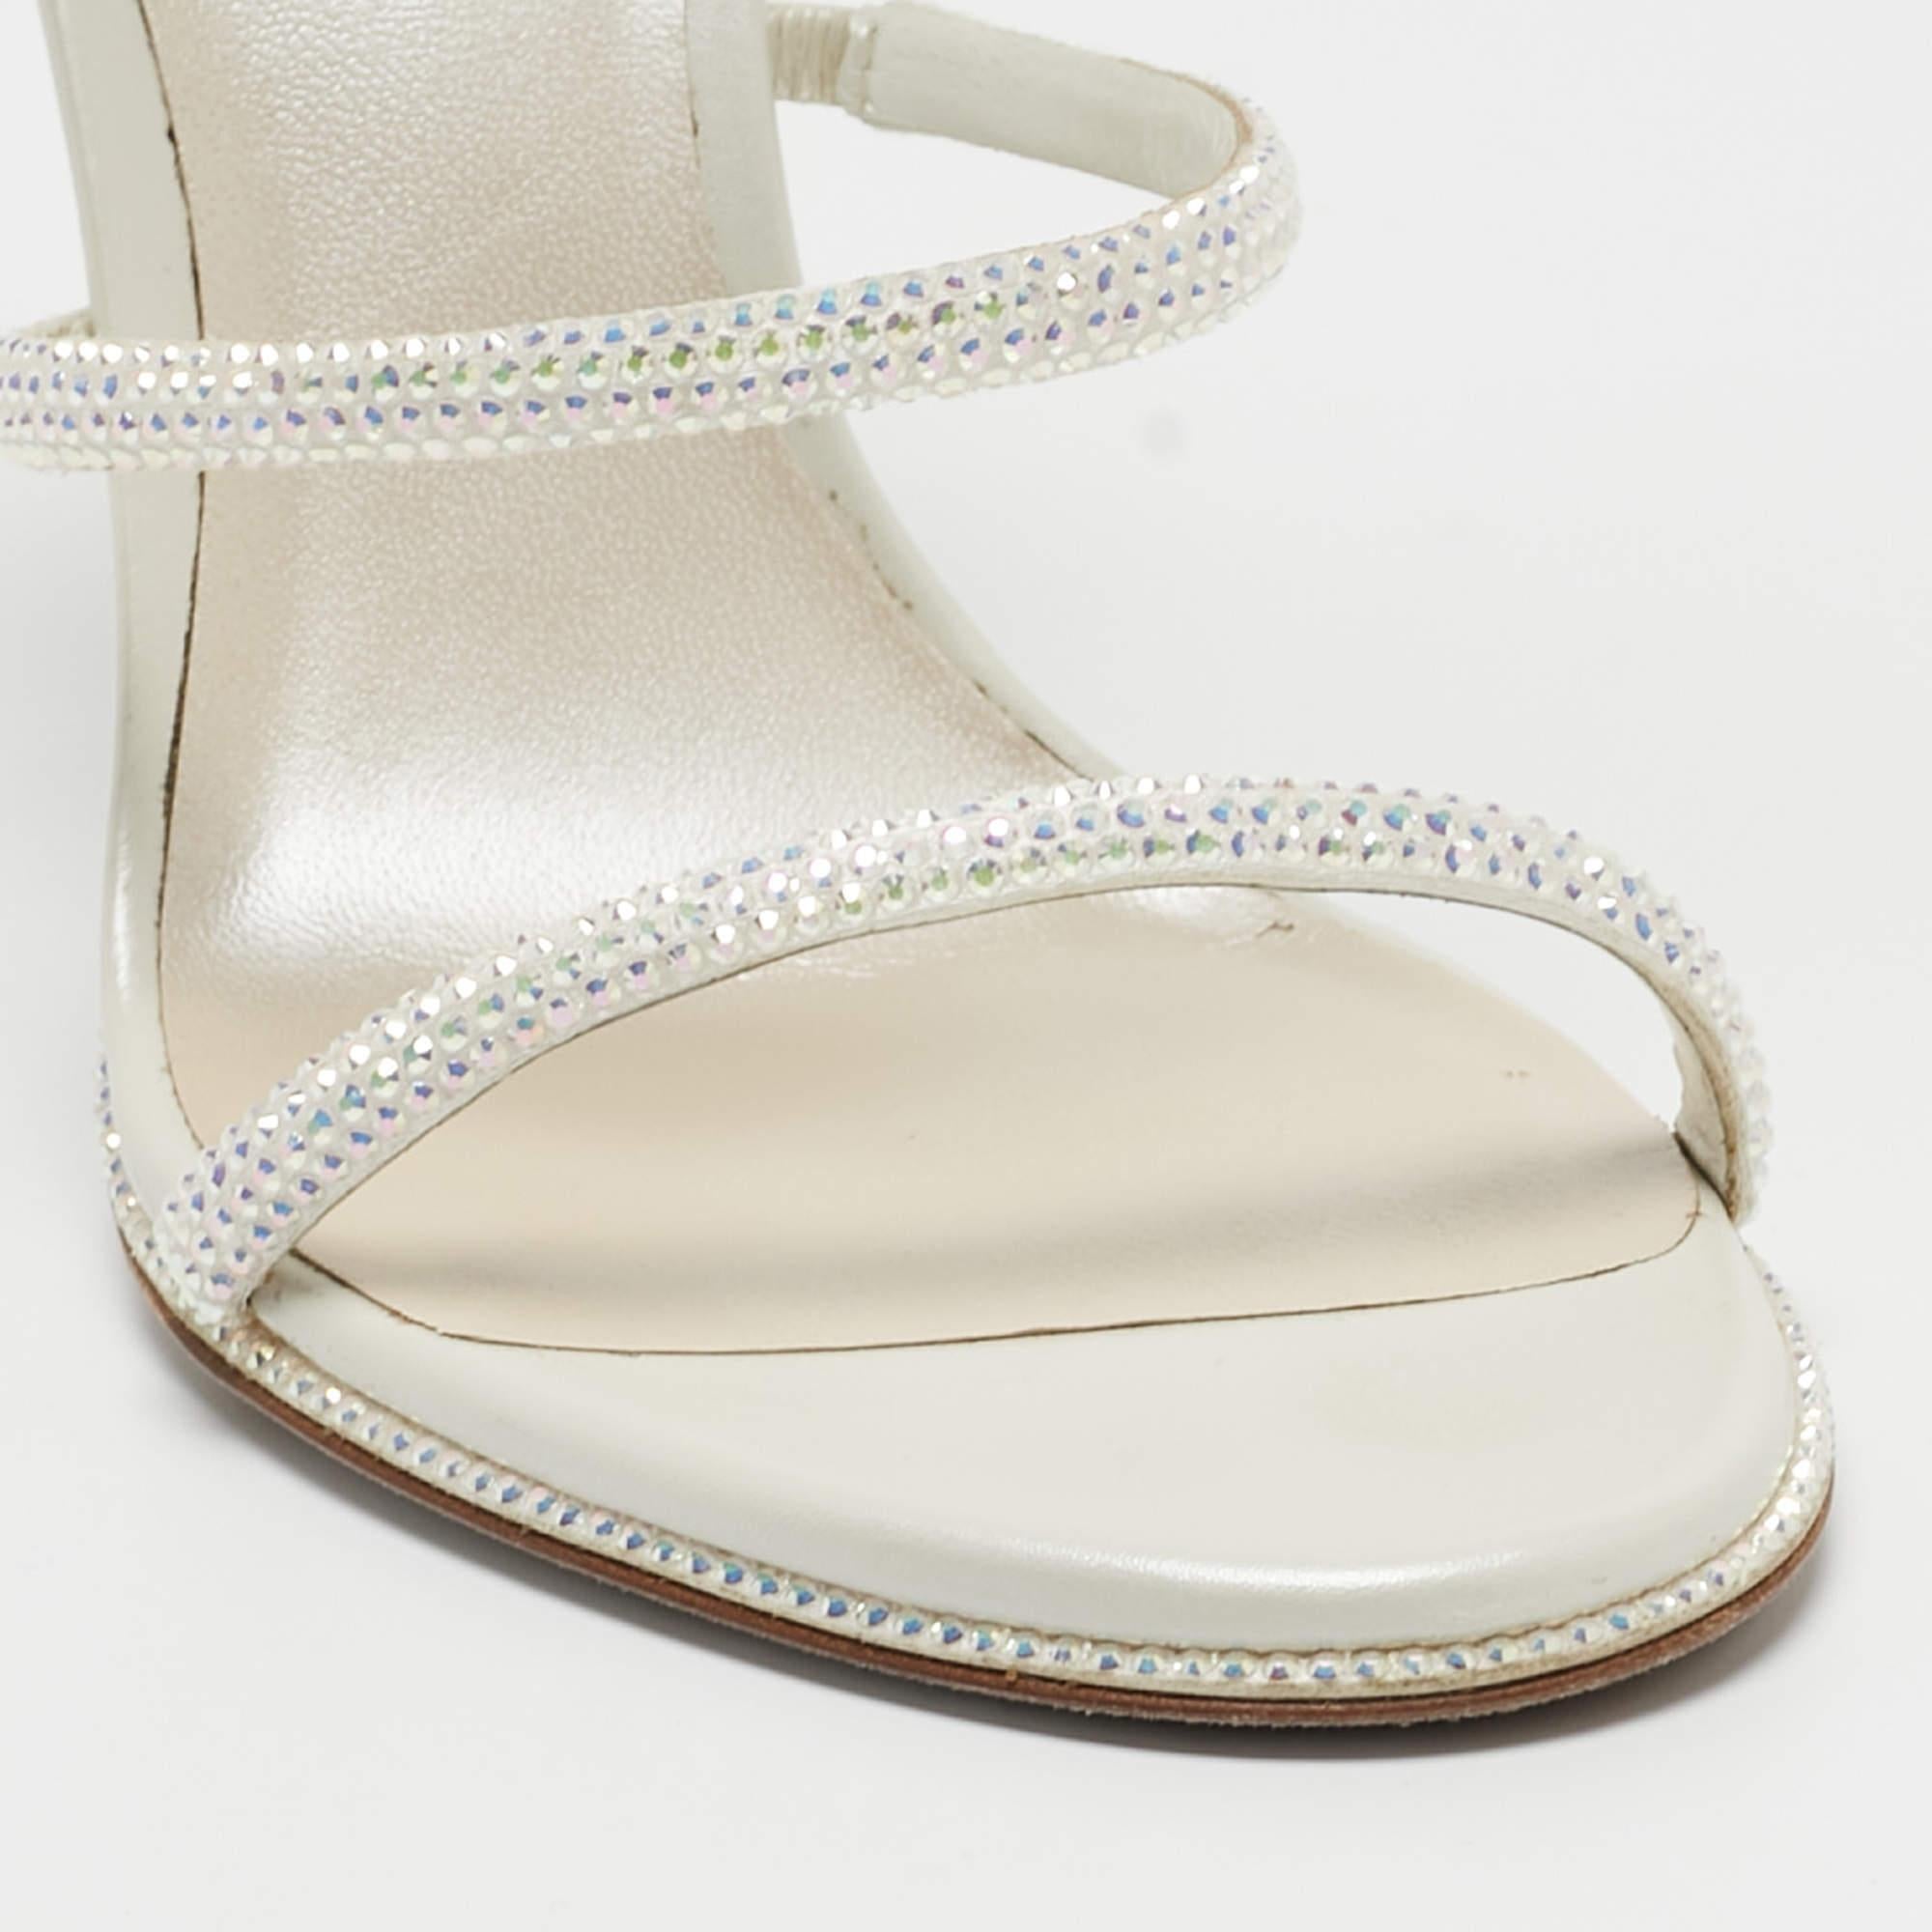 Women's René Caovilla White Satin Crystal Embellished and Leather Cleo Ankle Wrap Sandal